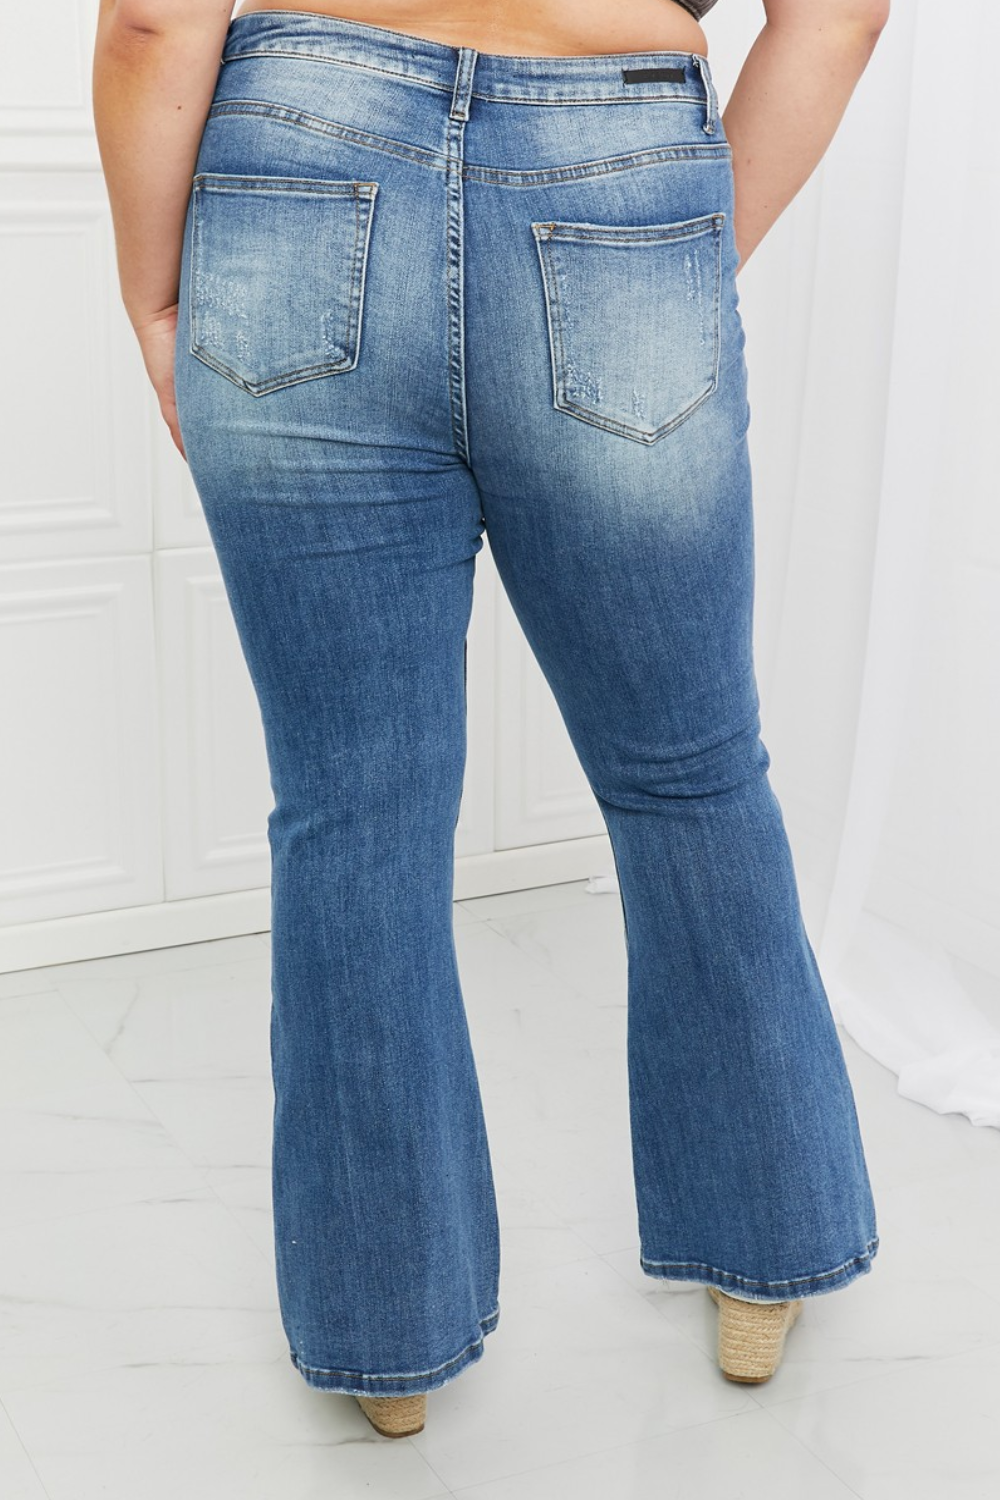 RISEN Full Size Iris High Waisted Distressed Flare Jeans in Medium Wash